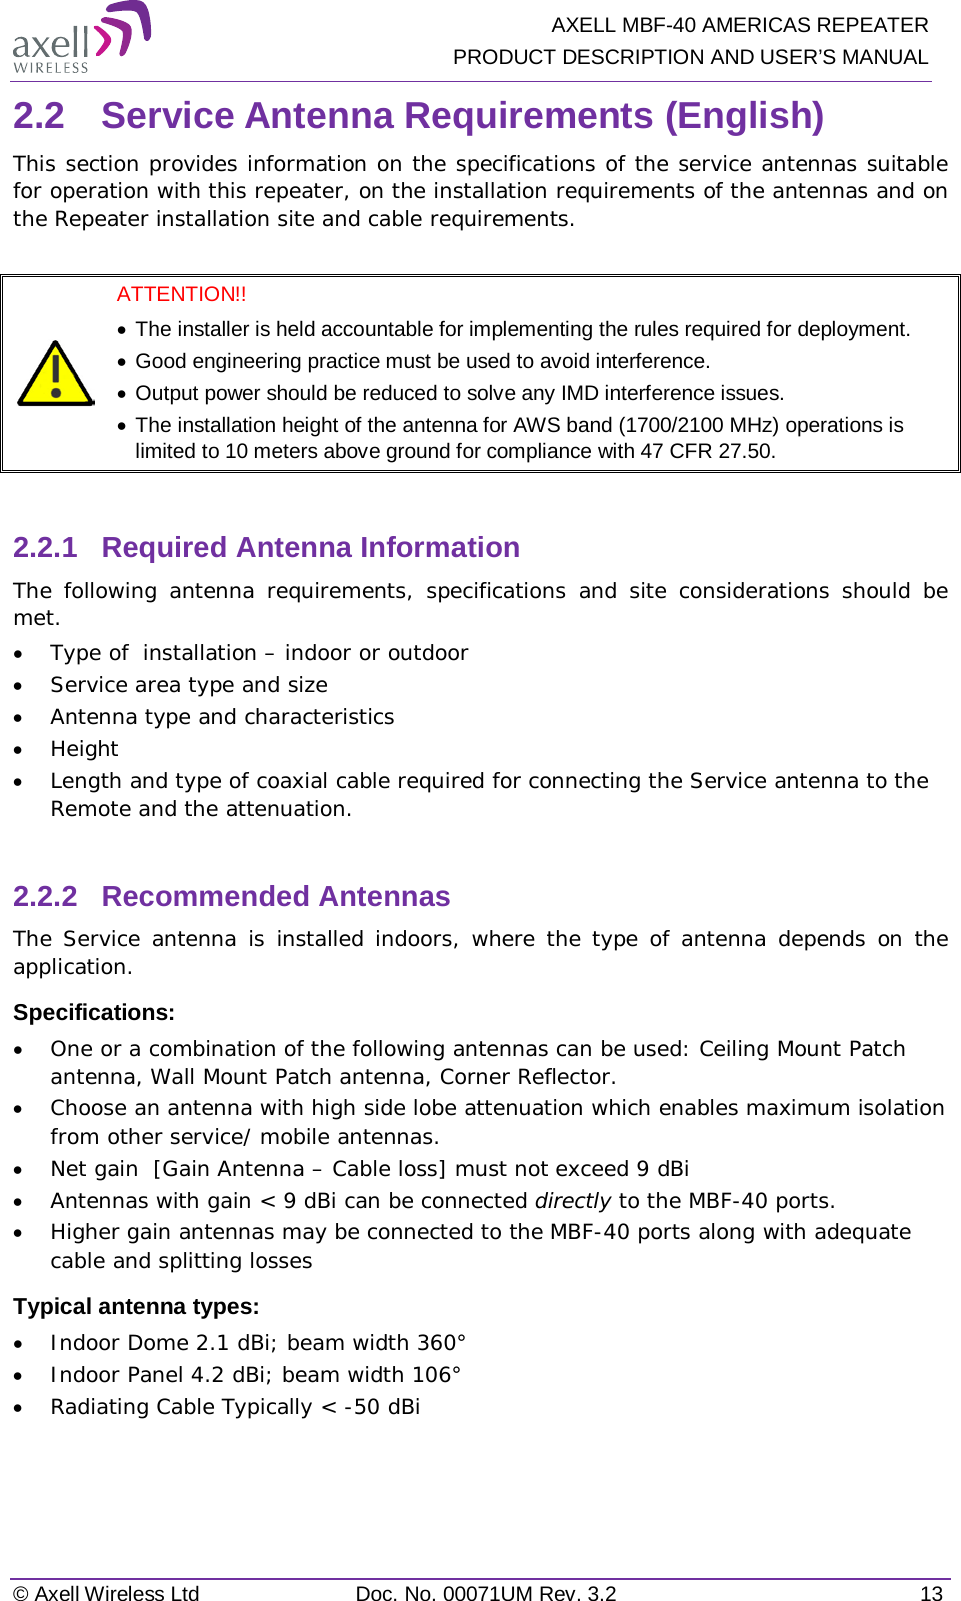   AXELL MBF-40 AMERICAS REPEATER PRODUCT DESCRIPTION AND USER’S MANUAL © Axell Wireless Ltd Doc. No. 00071UM Rev. 3.2 13 2.2  Service Antenna Requirements (English) This section provides information on the specifications of the service antennas suitable for operation with this repeater, on the installation requirements of the antennas and on the Repeater installation site and cable requirements.   ATTENTION!!  • The installer is held accountable for implementing the rules required for deployment.  • Good engineering practice must be used to avoid interference. • Output power should be reduced to solve any IMD interference issues. • The installation height of the antenna for AWS band (1700/2100 MHz) operations is limited to 10 meters above ground for compliance with 47 CFR 27.50.  2.2.1  Required Antenna Information  The following antenna requirements, specifications and site considerations should be met. • Type of  installation – indoor or outdoor • Service area type and size  • Antenna type and characteristics • Height • Length and type of coaxial cable required for connecting the Service antenna to the Remote and the attenuation.  2.2.2  Recommended Antennas  The Service antenna is installed indoors, where the type of antenna depends on the application. Specifications: • One or a combination of the following antennas can be used: Ceiling Mount Patch antenna, Wall Mount Patch antenna, Corner Reflector. • Choose an antenna with high side lobe attenuation which enables maximum isolation from other service/ mobile antennas. • Net gain  [Gain Antenna – Cable loss] must not exceed 9 dBi • Antennas with gain &lt; 9 dBi can be connected directly to the MBF-40 ports. • Higher gain antennas may be connected to the MBF-40 ports along with adequate cable and splitting losses  Typical antenna types: • Indoor Dome 2.1 dBi; beam width 360° • Indoor Panel 4.2 dBi; beam width 106° • Radiating Cable Typically &lt; -50 dBi    